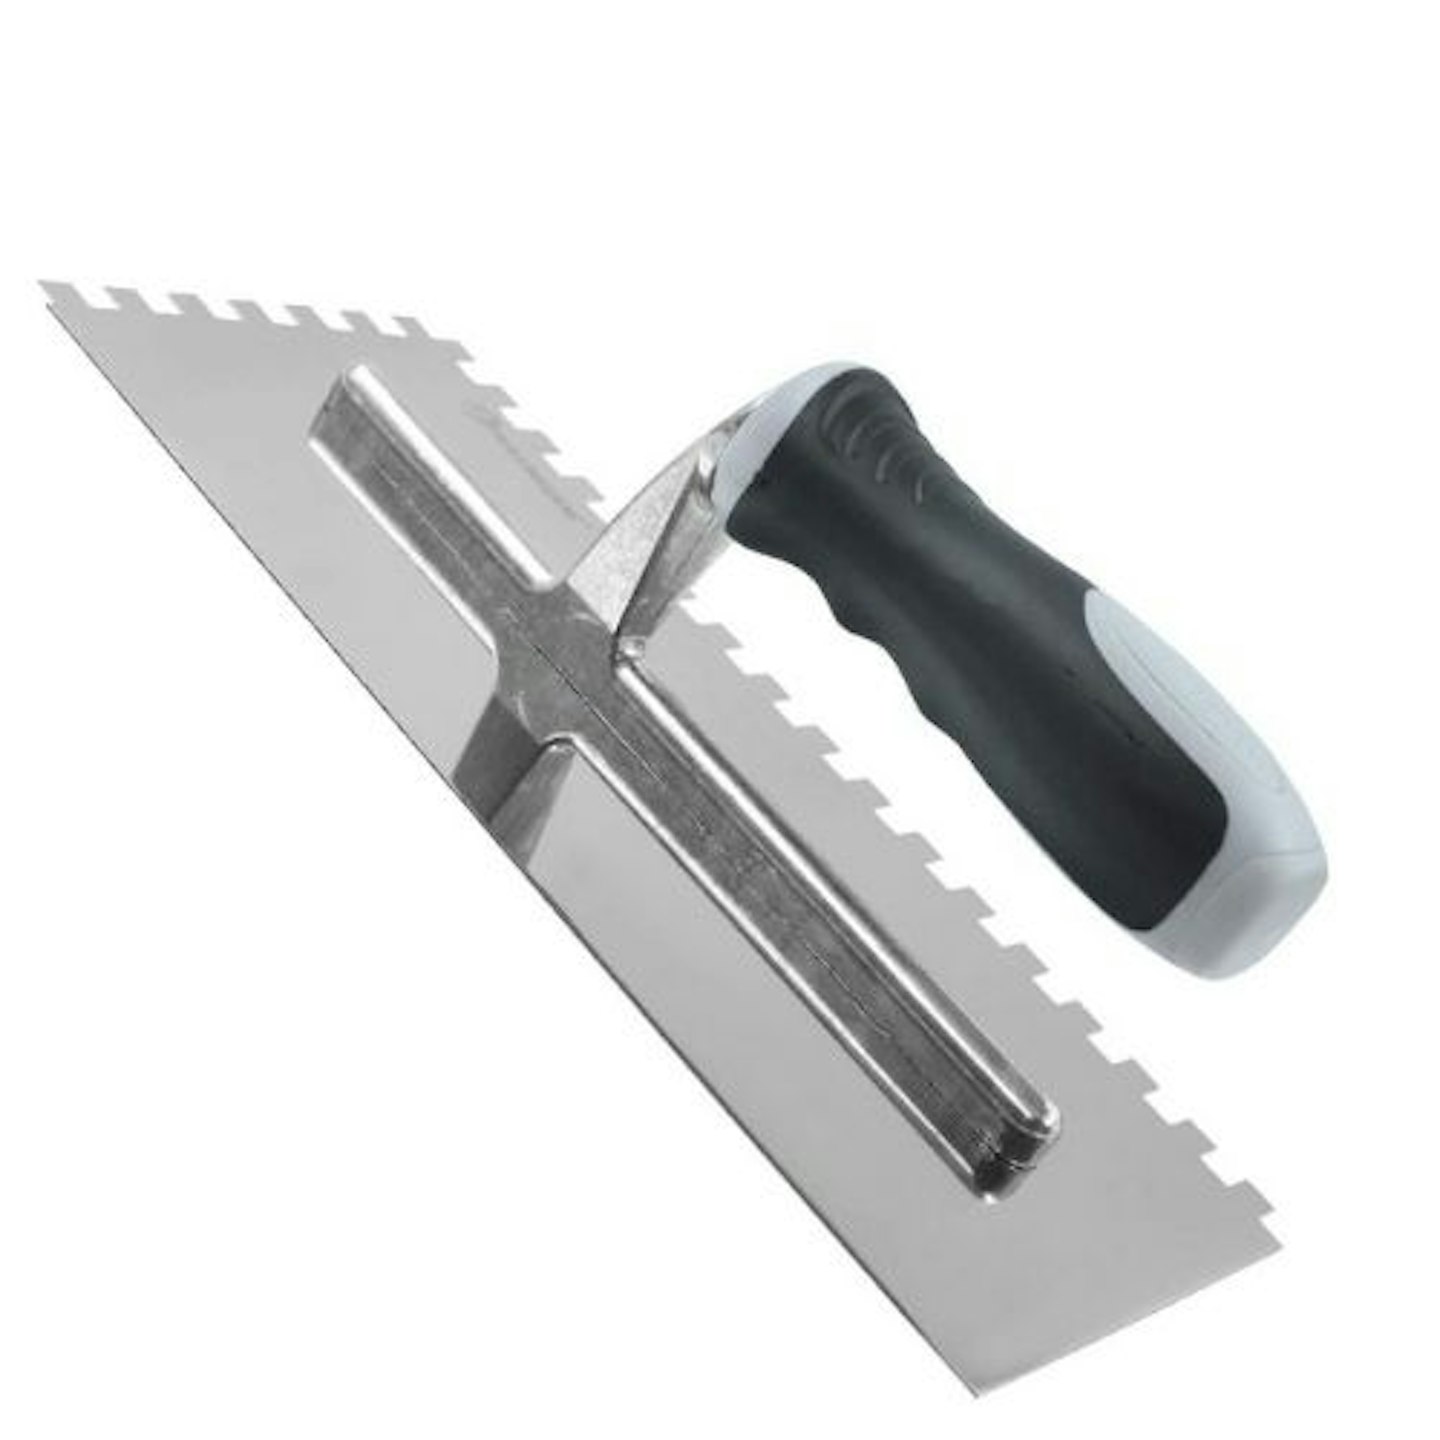 ROLLINGDOGu2019S Stainless Steel Plastering Trowel with Two Sided 5/16 inch Square Notched Edges